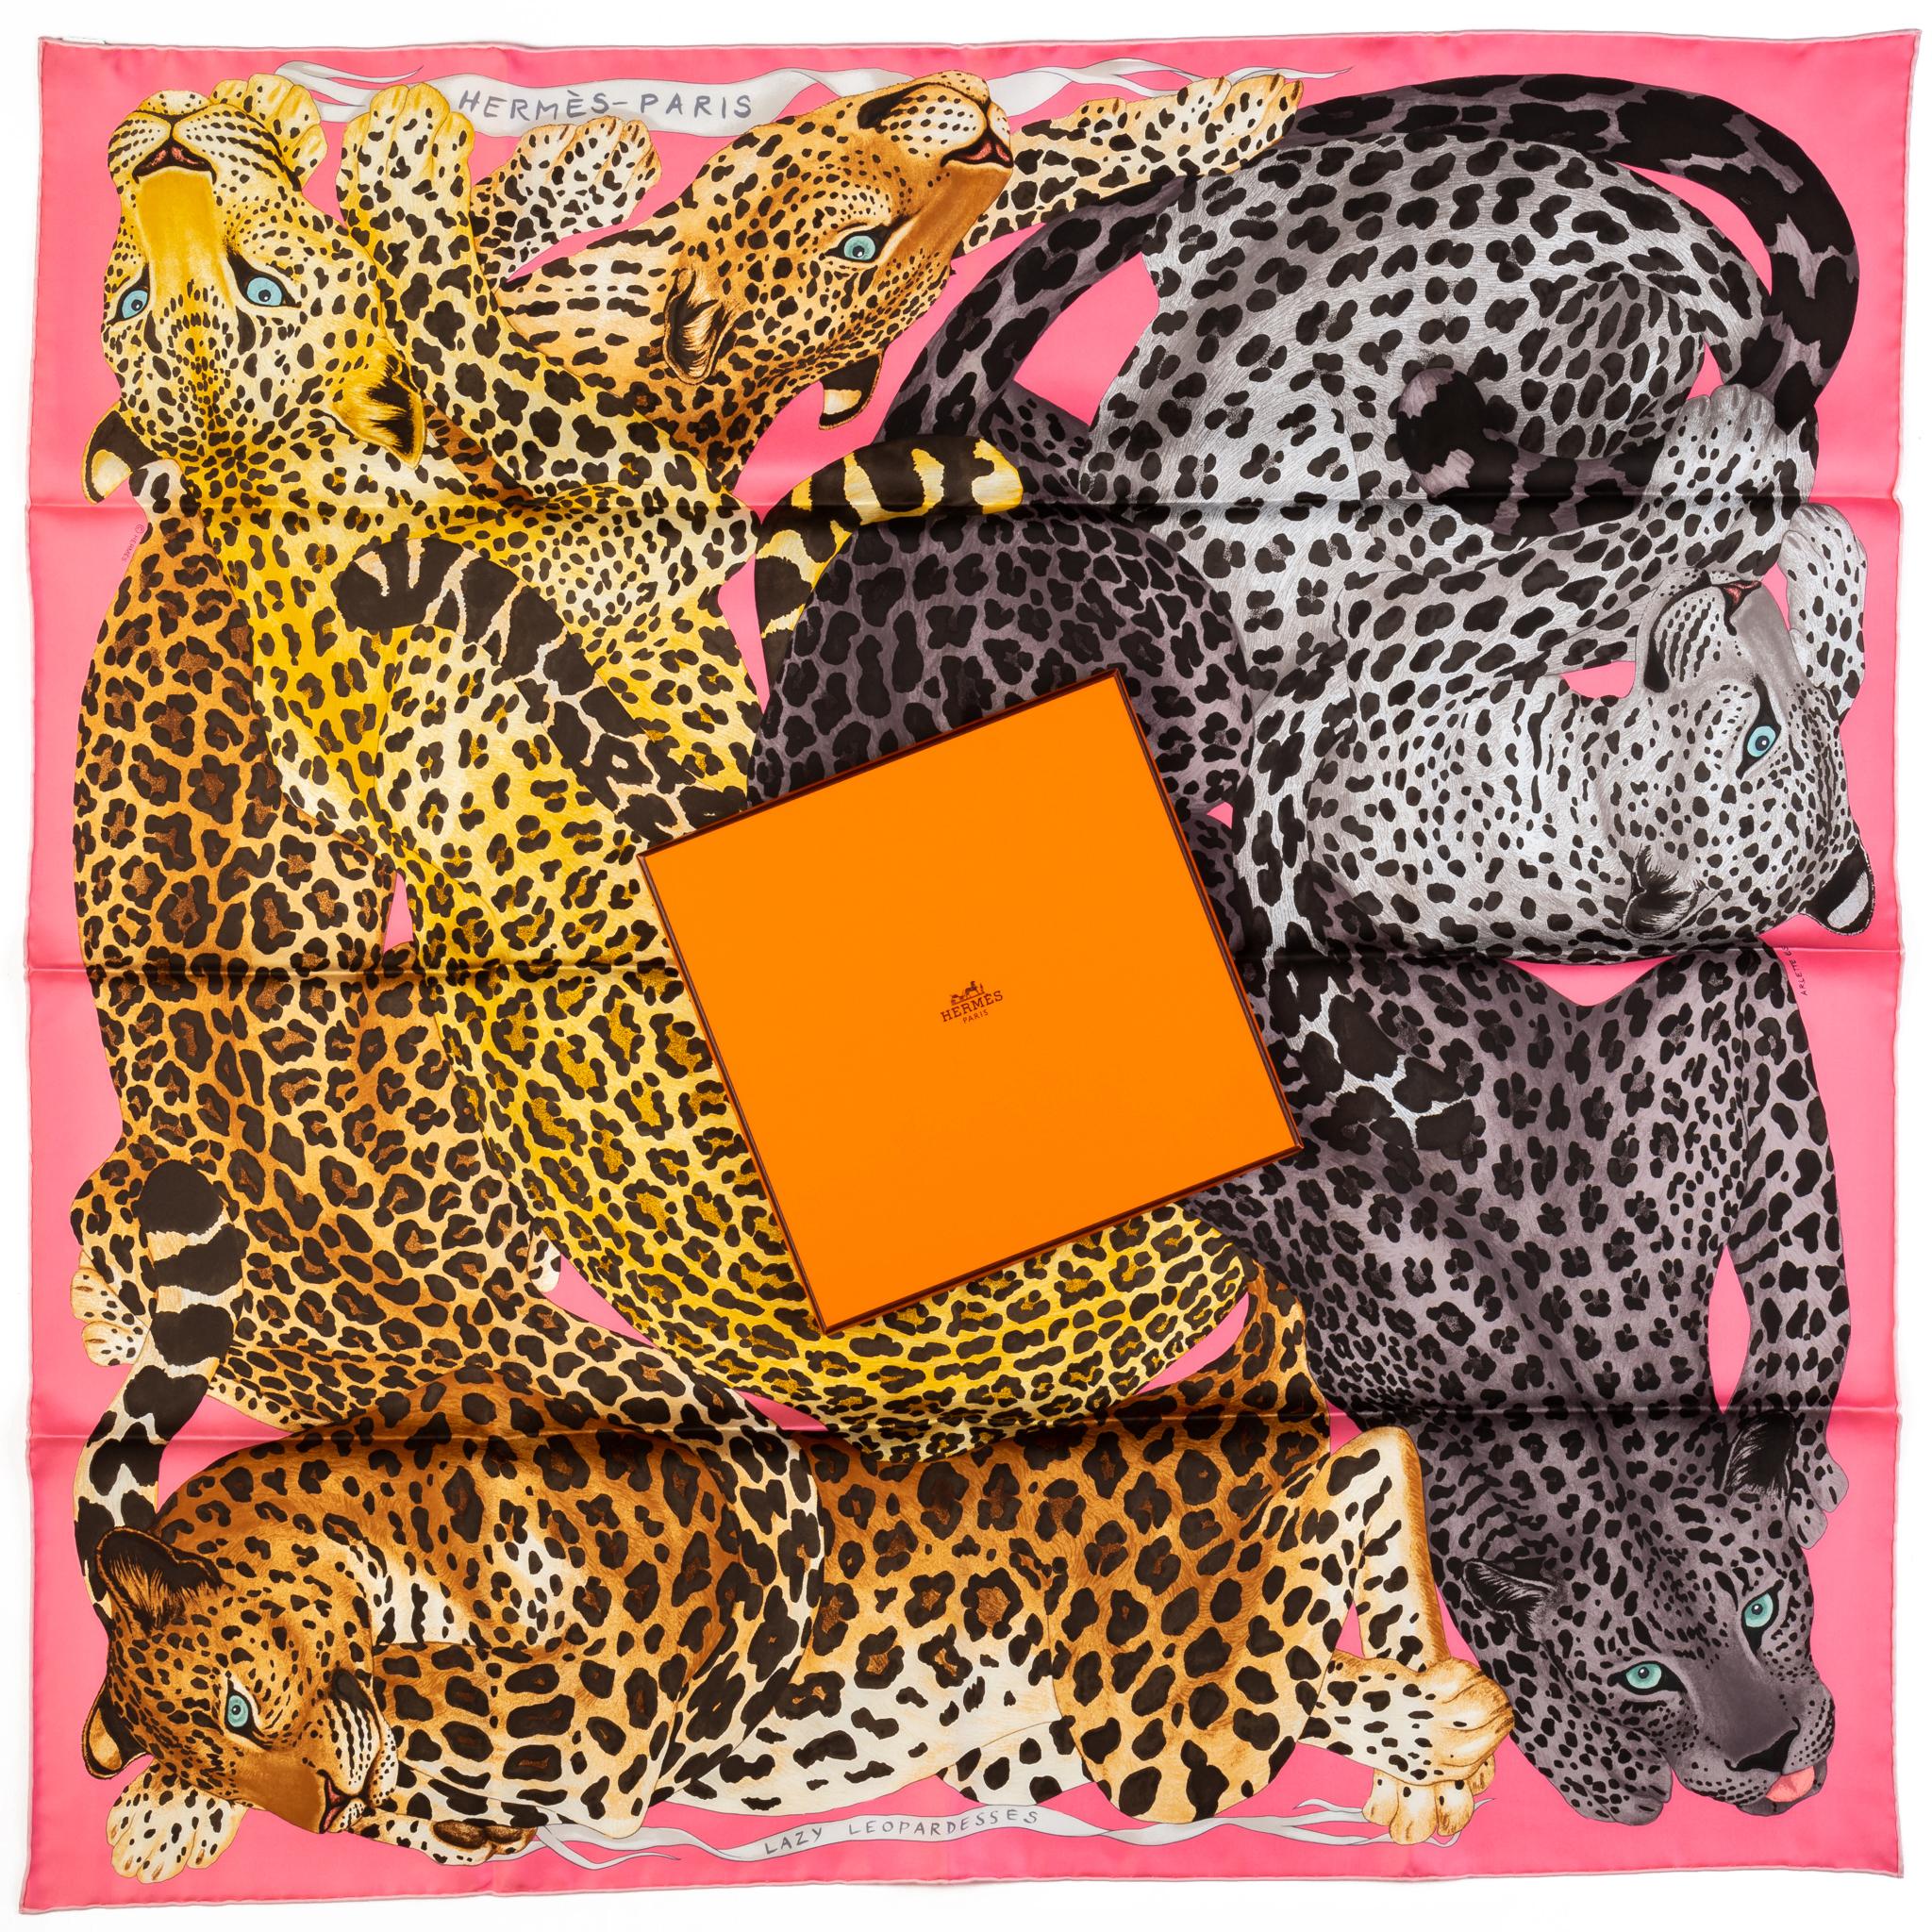 Hermès new Lazy Leopardess silk scarf . Pink color way. Hand rolled edges. Comes with original box.